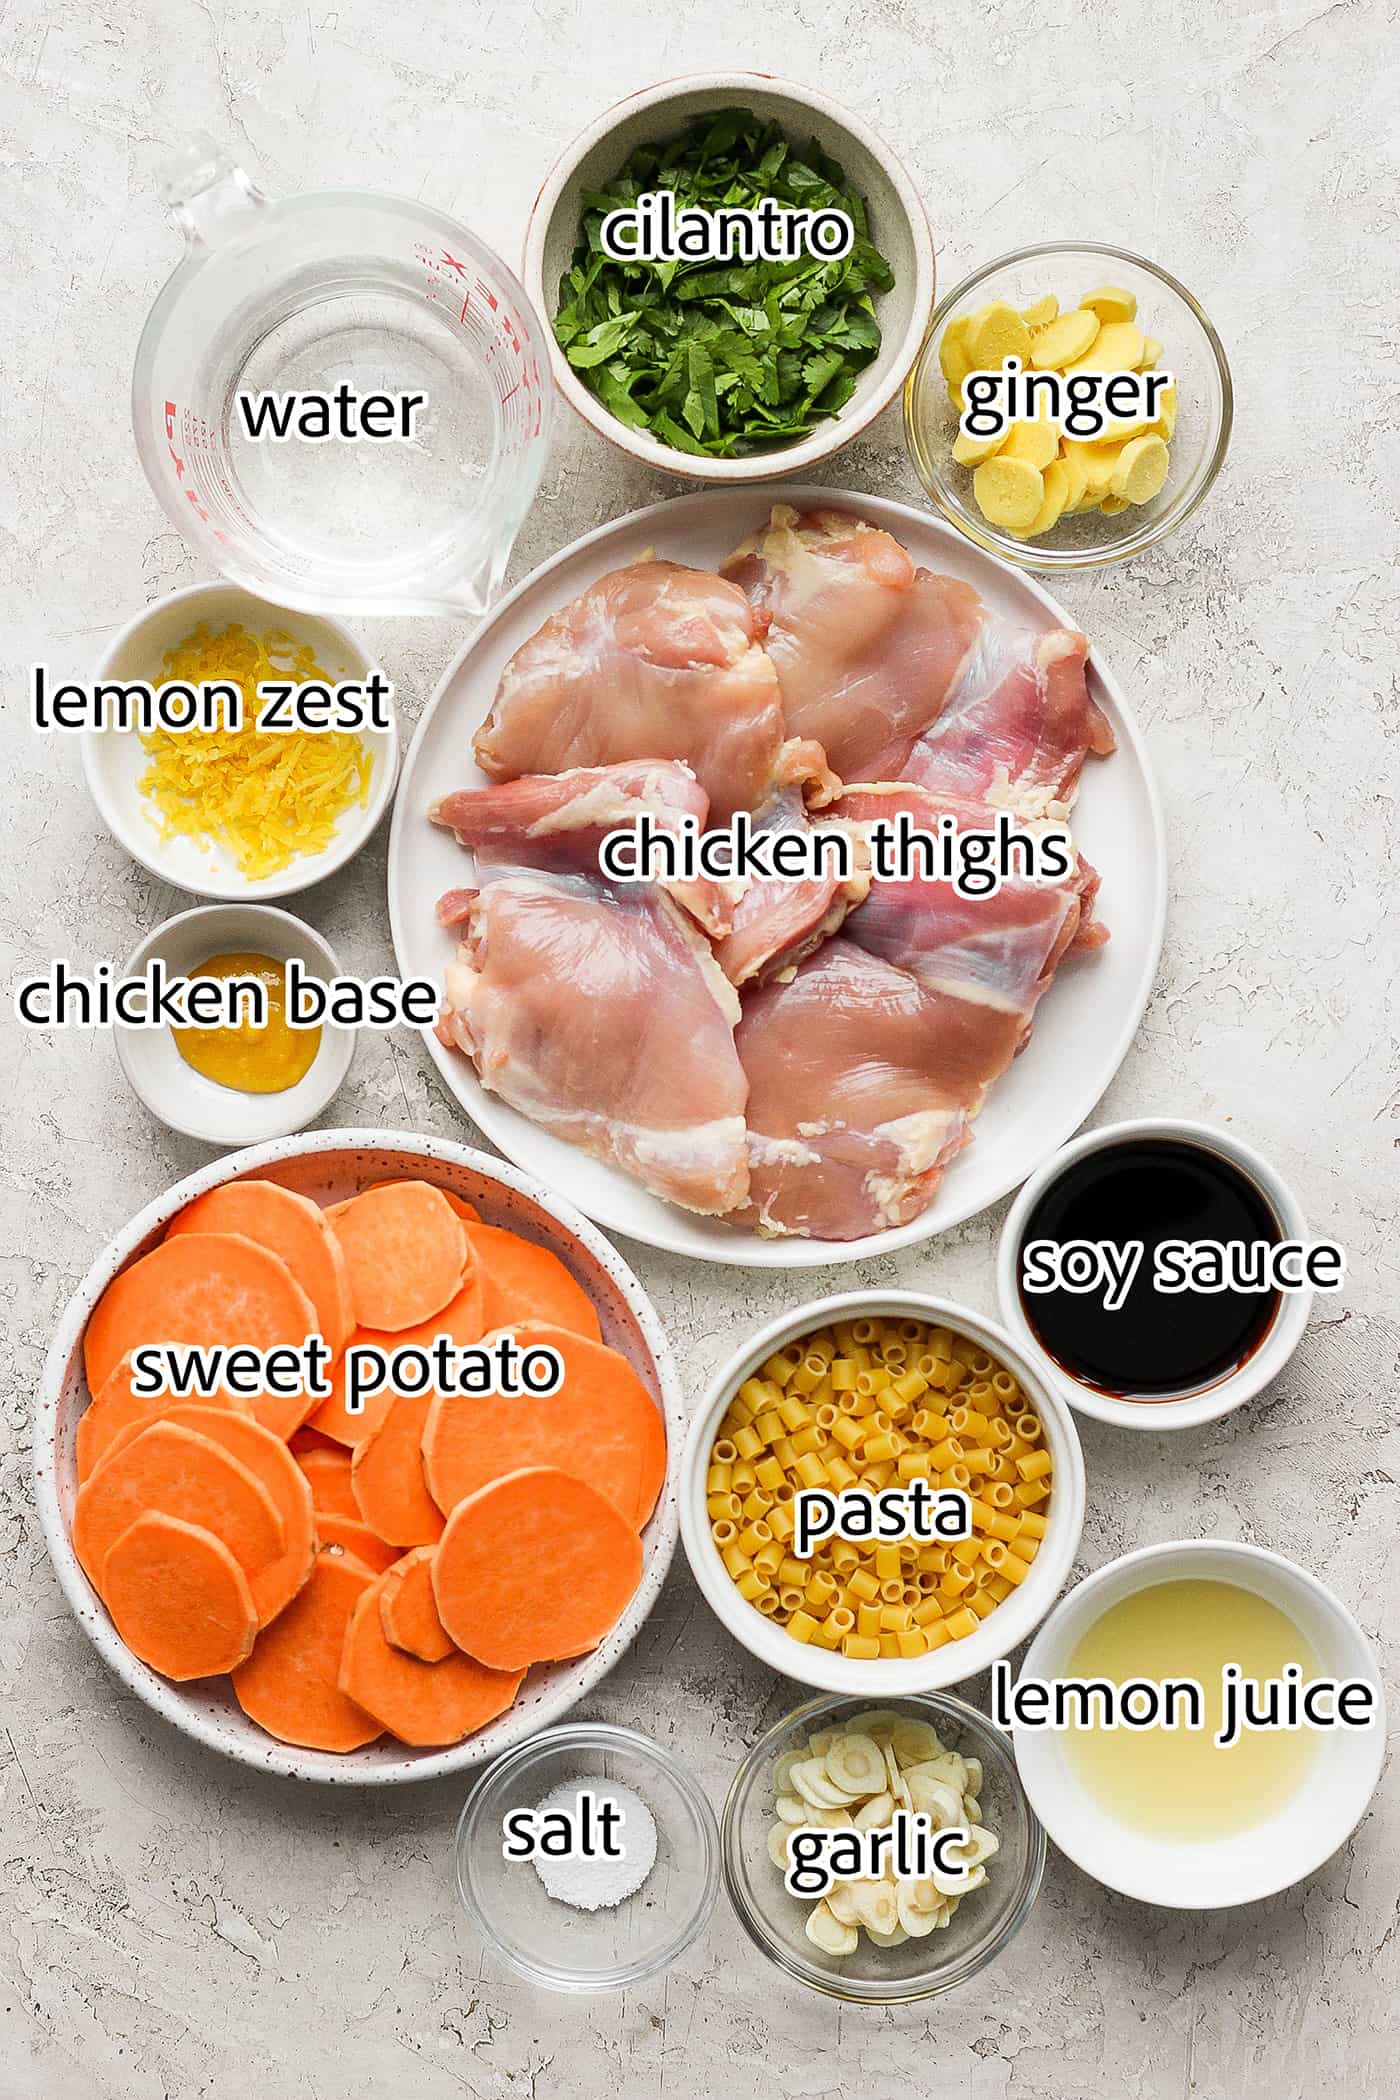 Ingredients needed to make ginger chicken soup include chicken thighs, sweet potatoes, lemon zest and juice, garlic, ginger, soy sauce, pasta, water, salt and pepper.